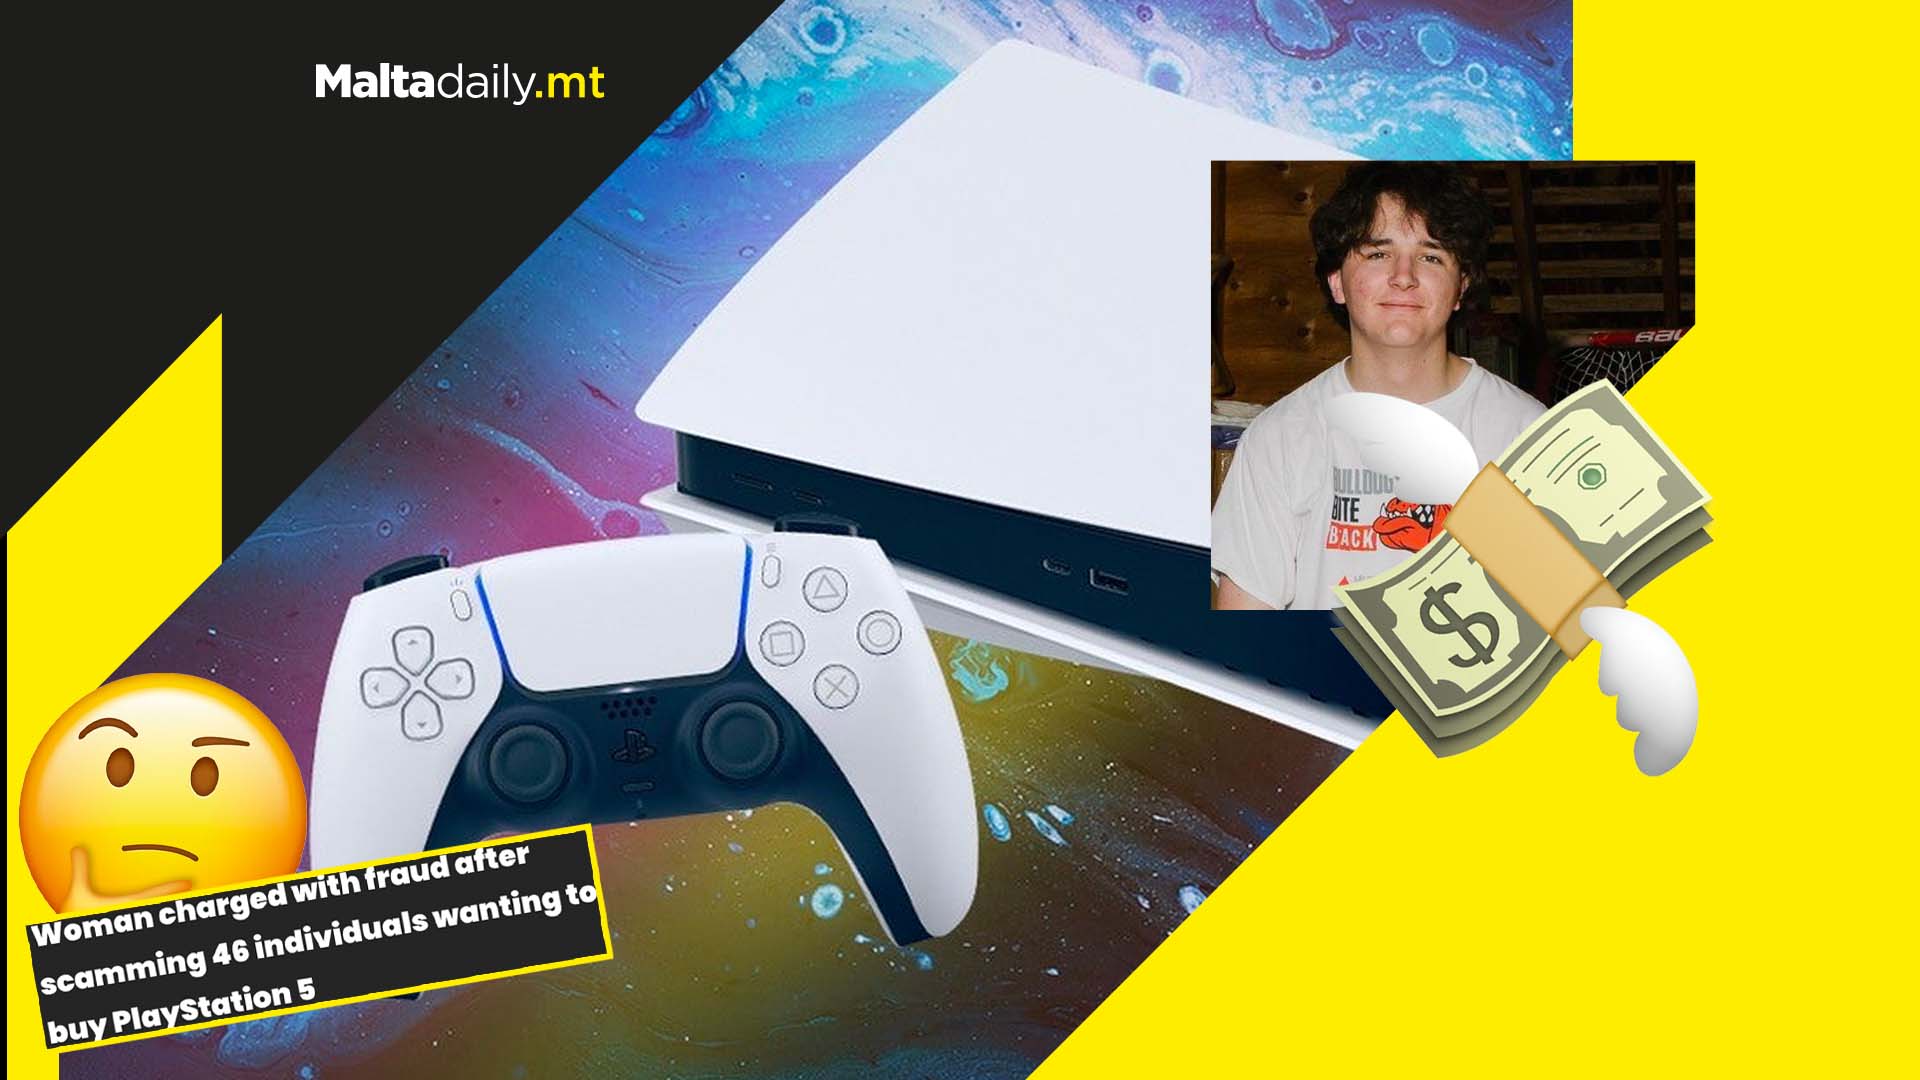 Teen makes $1.7 million by reselling PS5 consoles for double the price